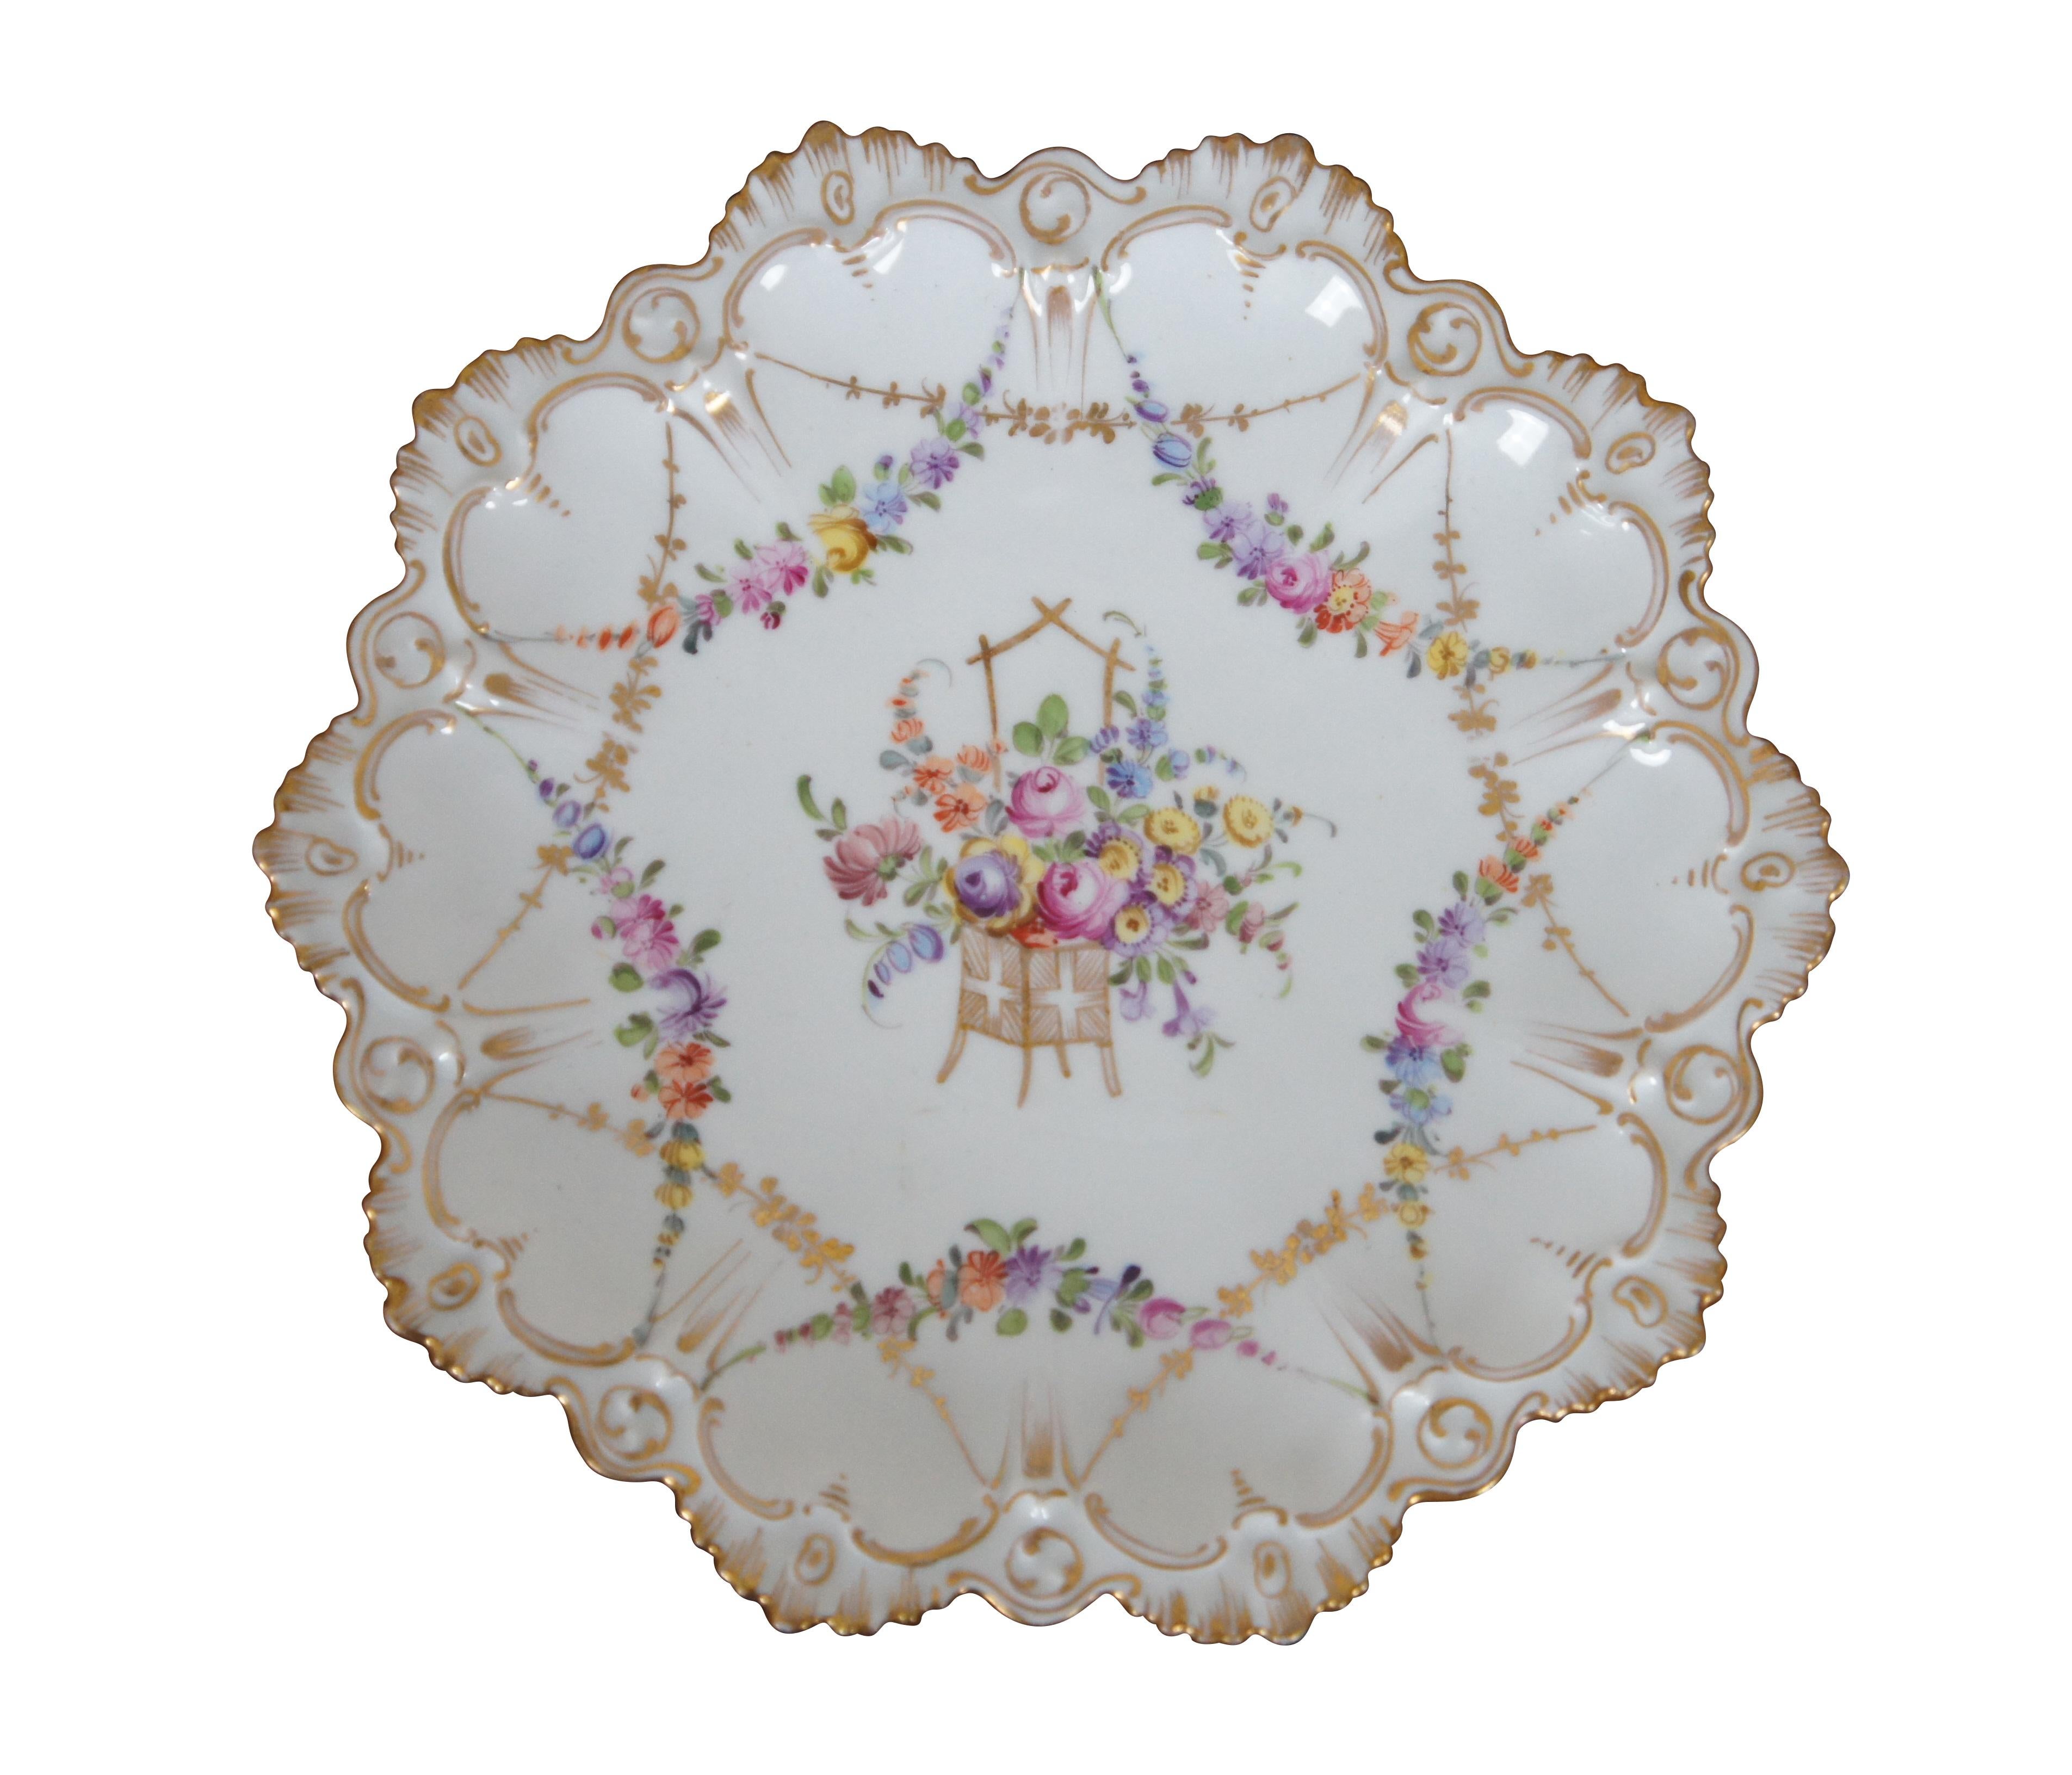 2 Antique Franziska Hirsch Dresden Porcelain Polychrome Scalloped Floral Plates In Good Condition For Sale In Dayton, OH